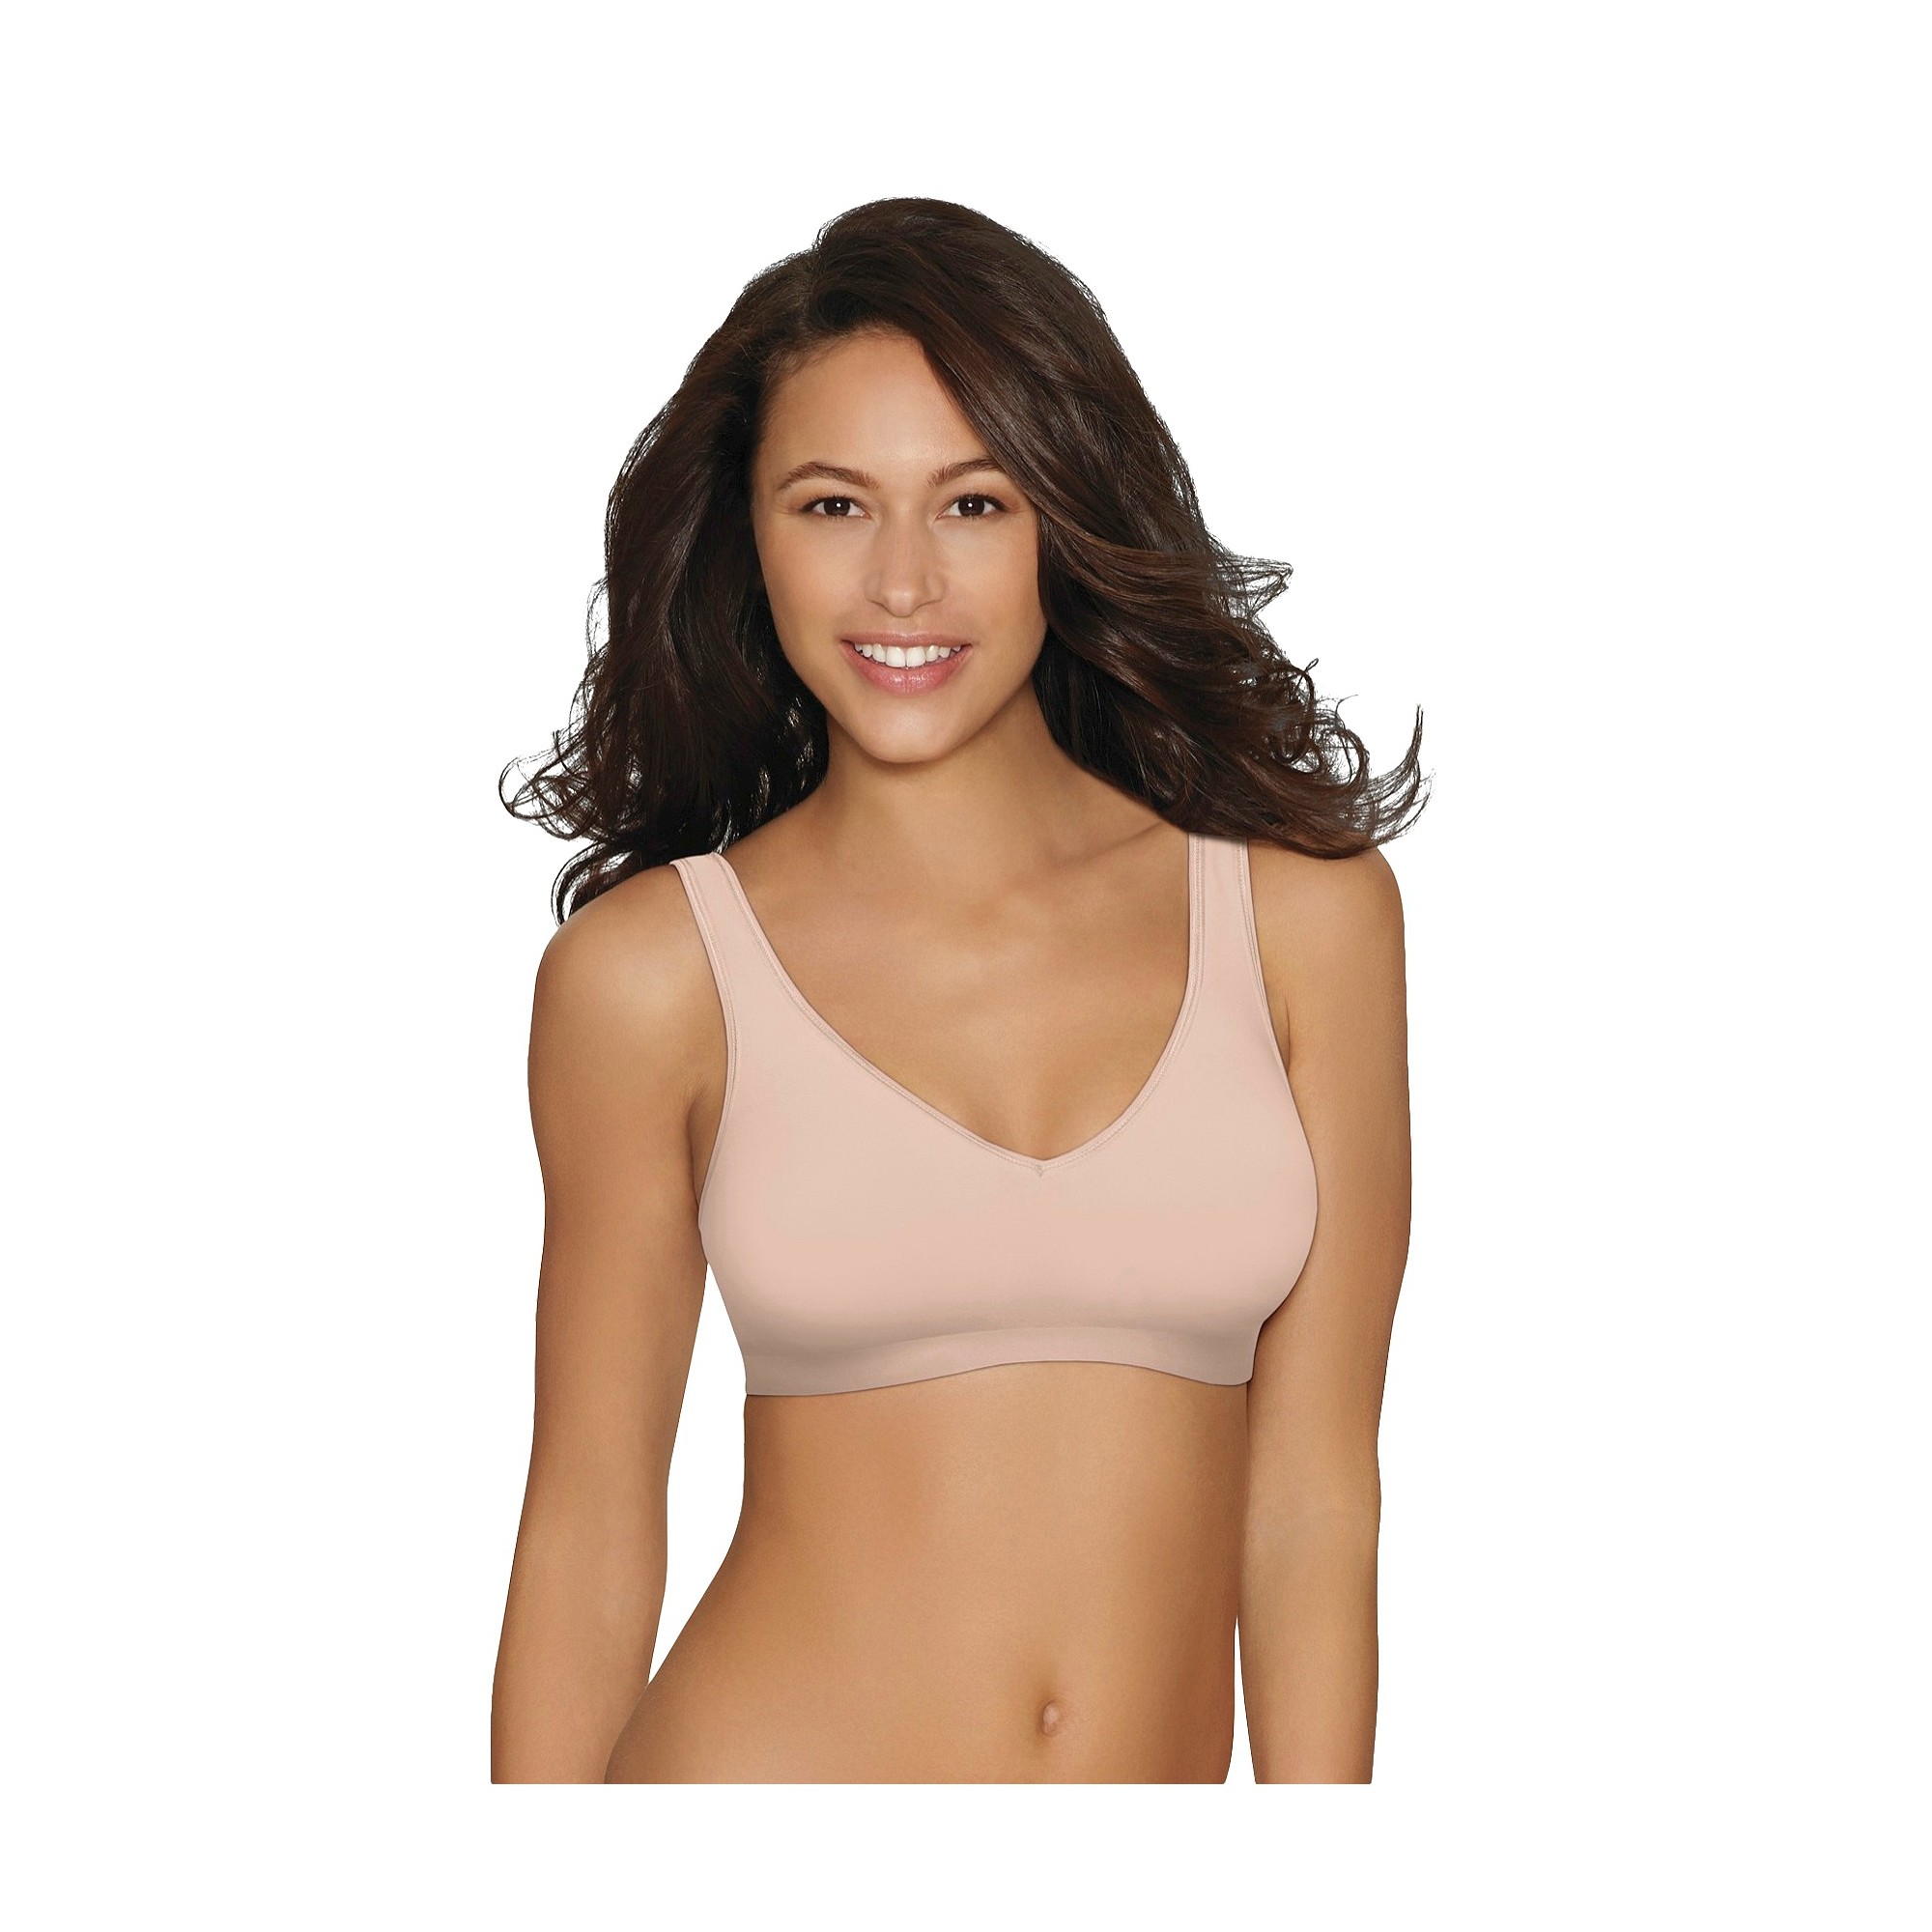 Hanes Women's Full Coverage SmoothTec Band Unlined Wireless Bra G796 - Nude  L, Size: Large, by Hanes